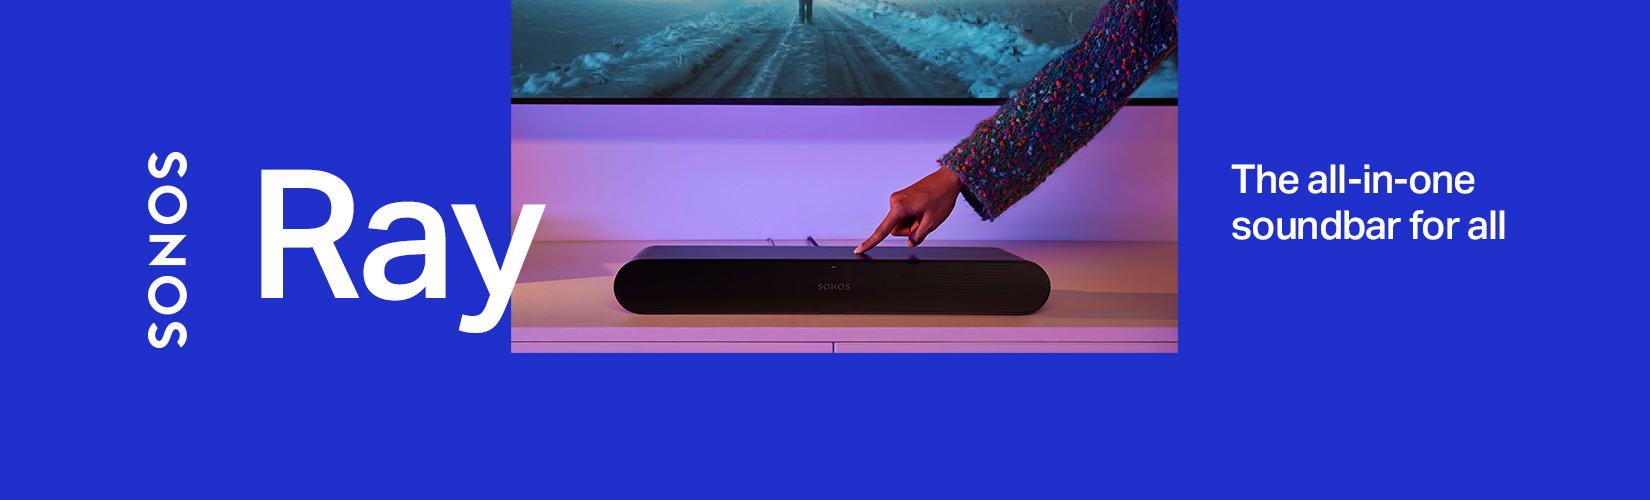 Sonos Ray. The all-in-one soundbar for all.